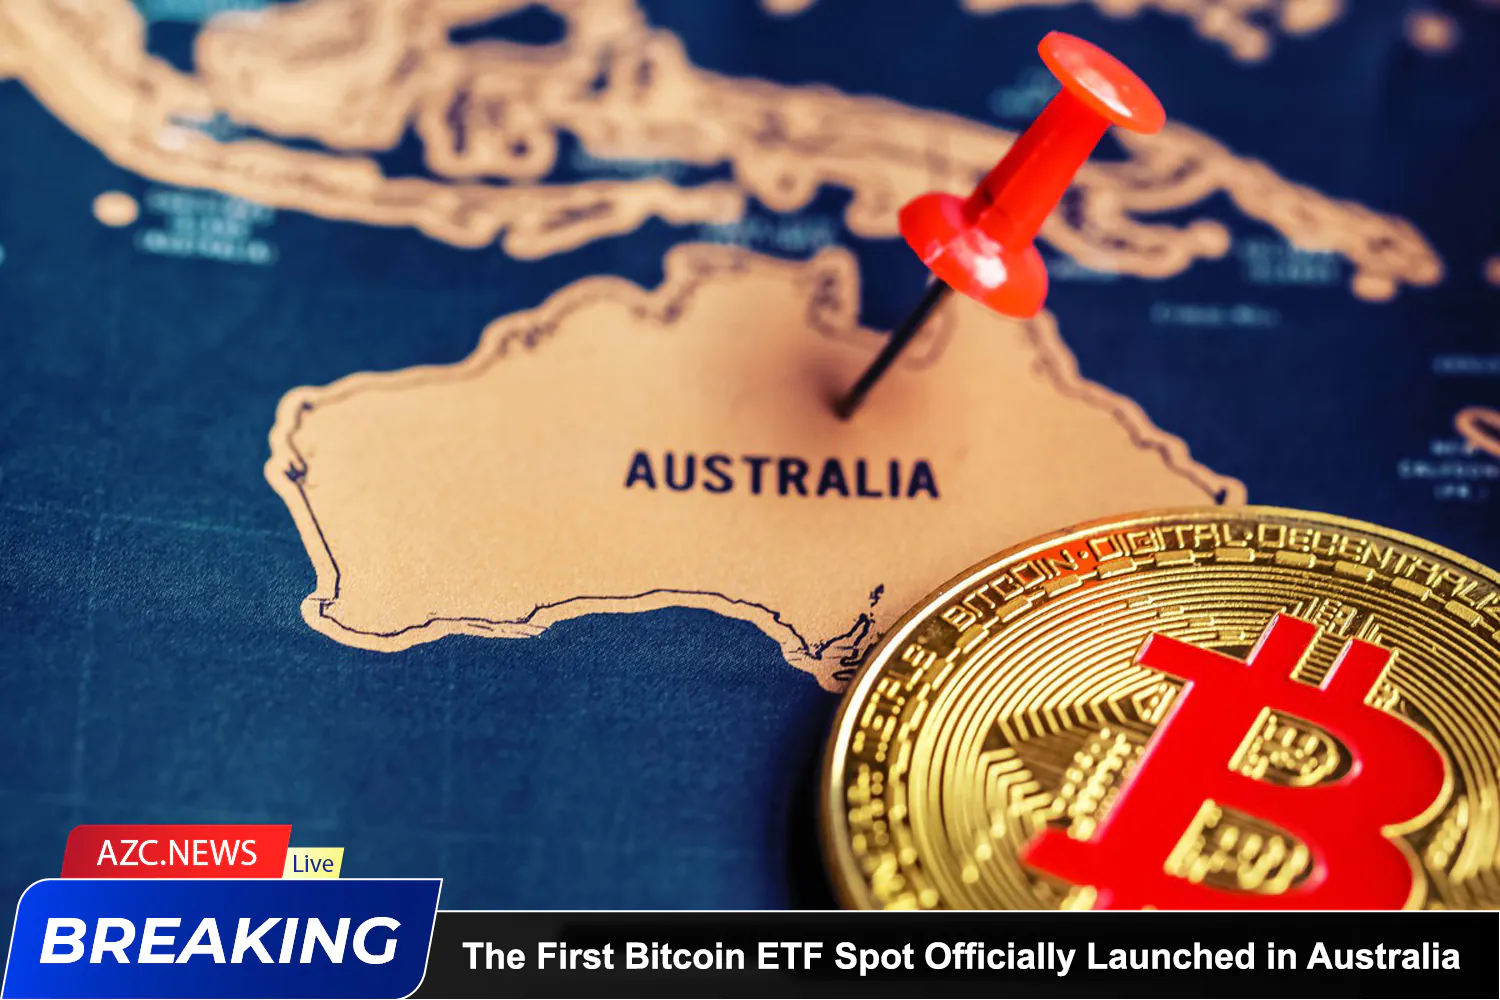 Azcnews The First Bitcoin Etf Spot Officially Launched In Australia